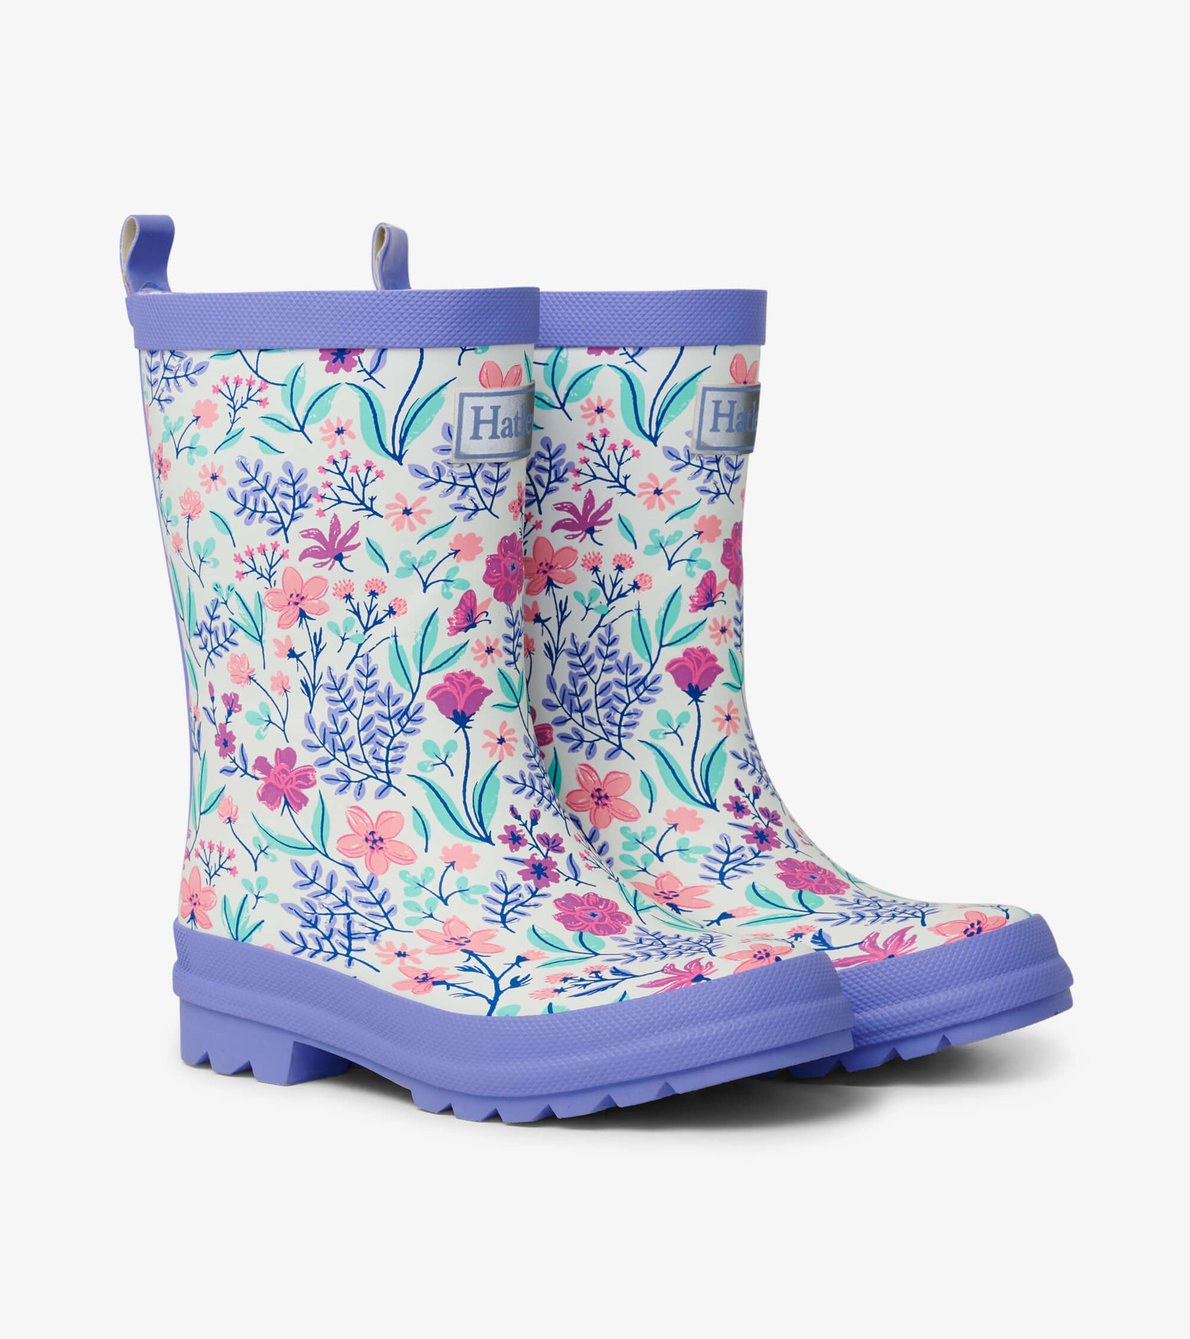 View larger image of Wild Flowers Matte Rain Boots